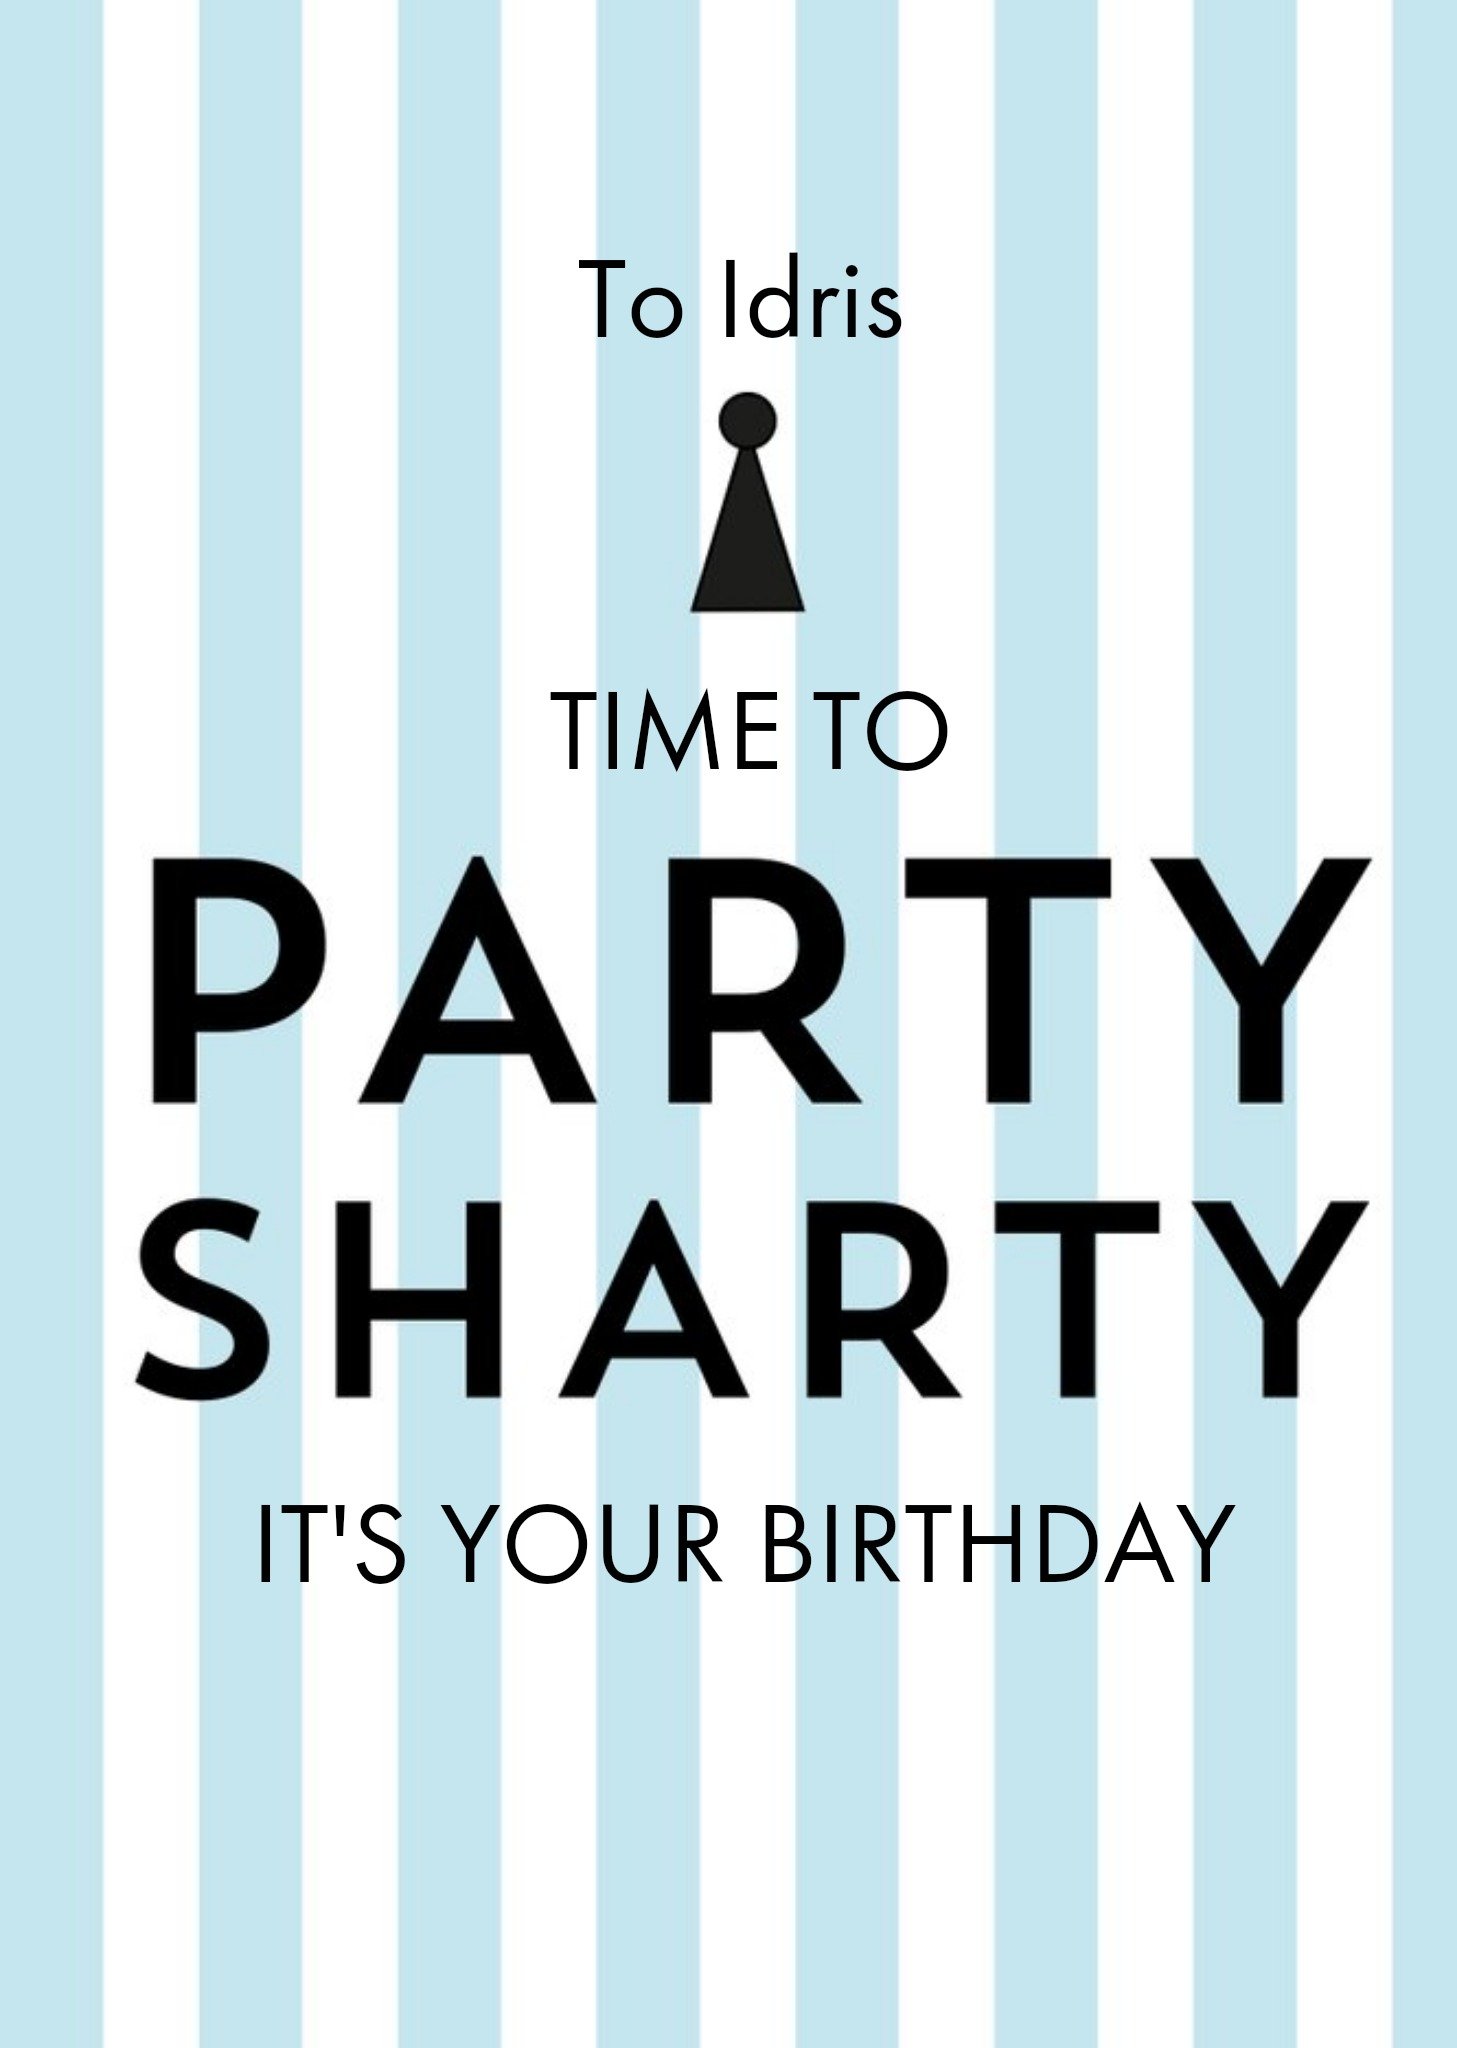 Eastern Print Studio Time To Party Sharty It's Your Birthday Islamic Birthday Card Ecard